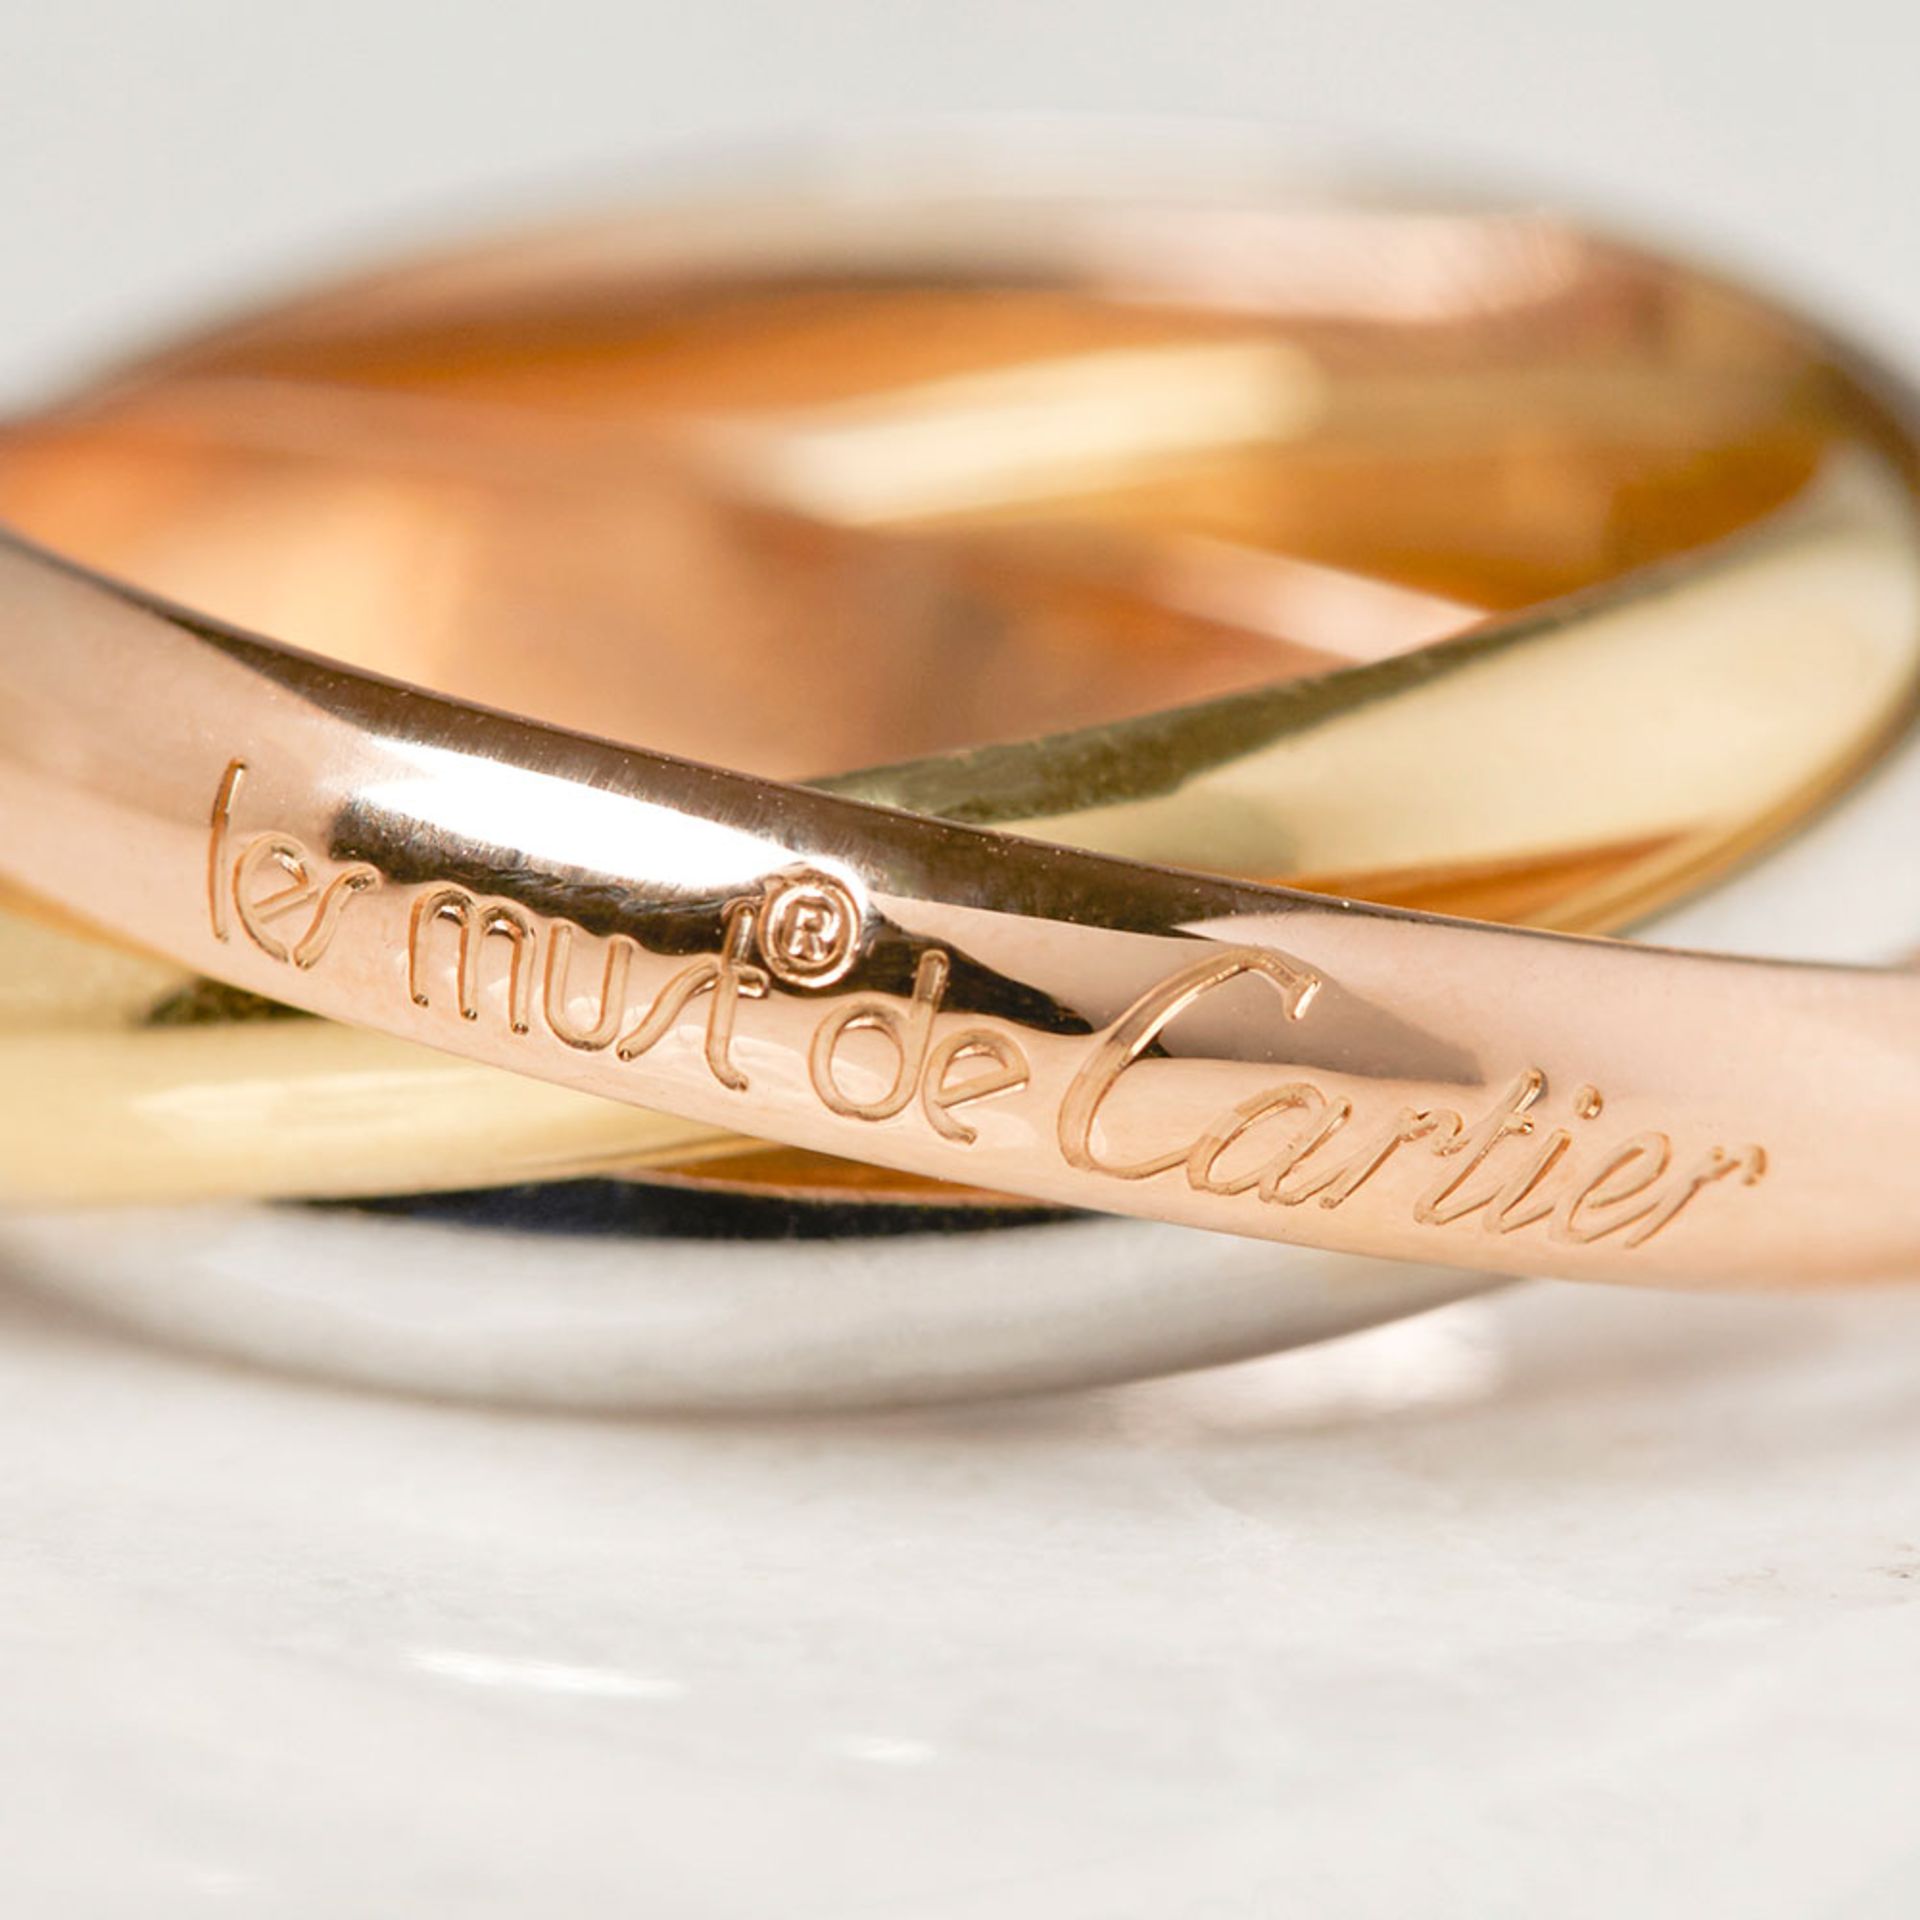 Cartier 18k Yellow, White & Rose Gold Trinity Ring - Image 5 of 6